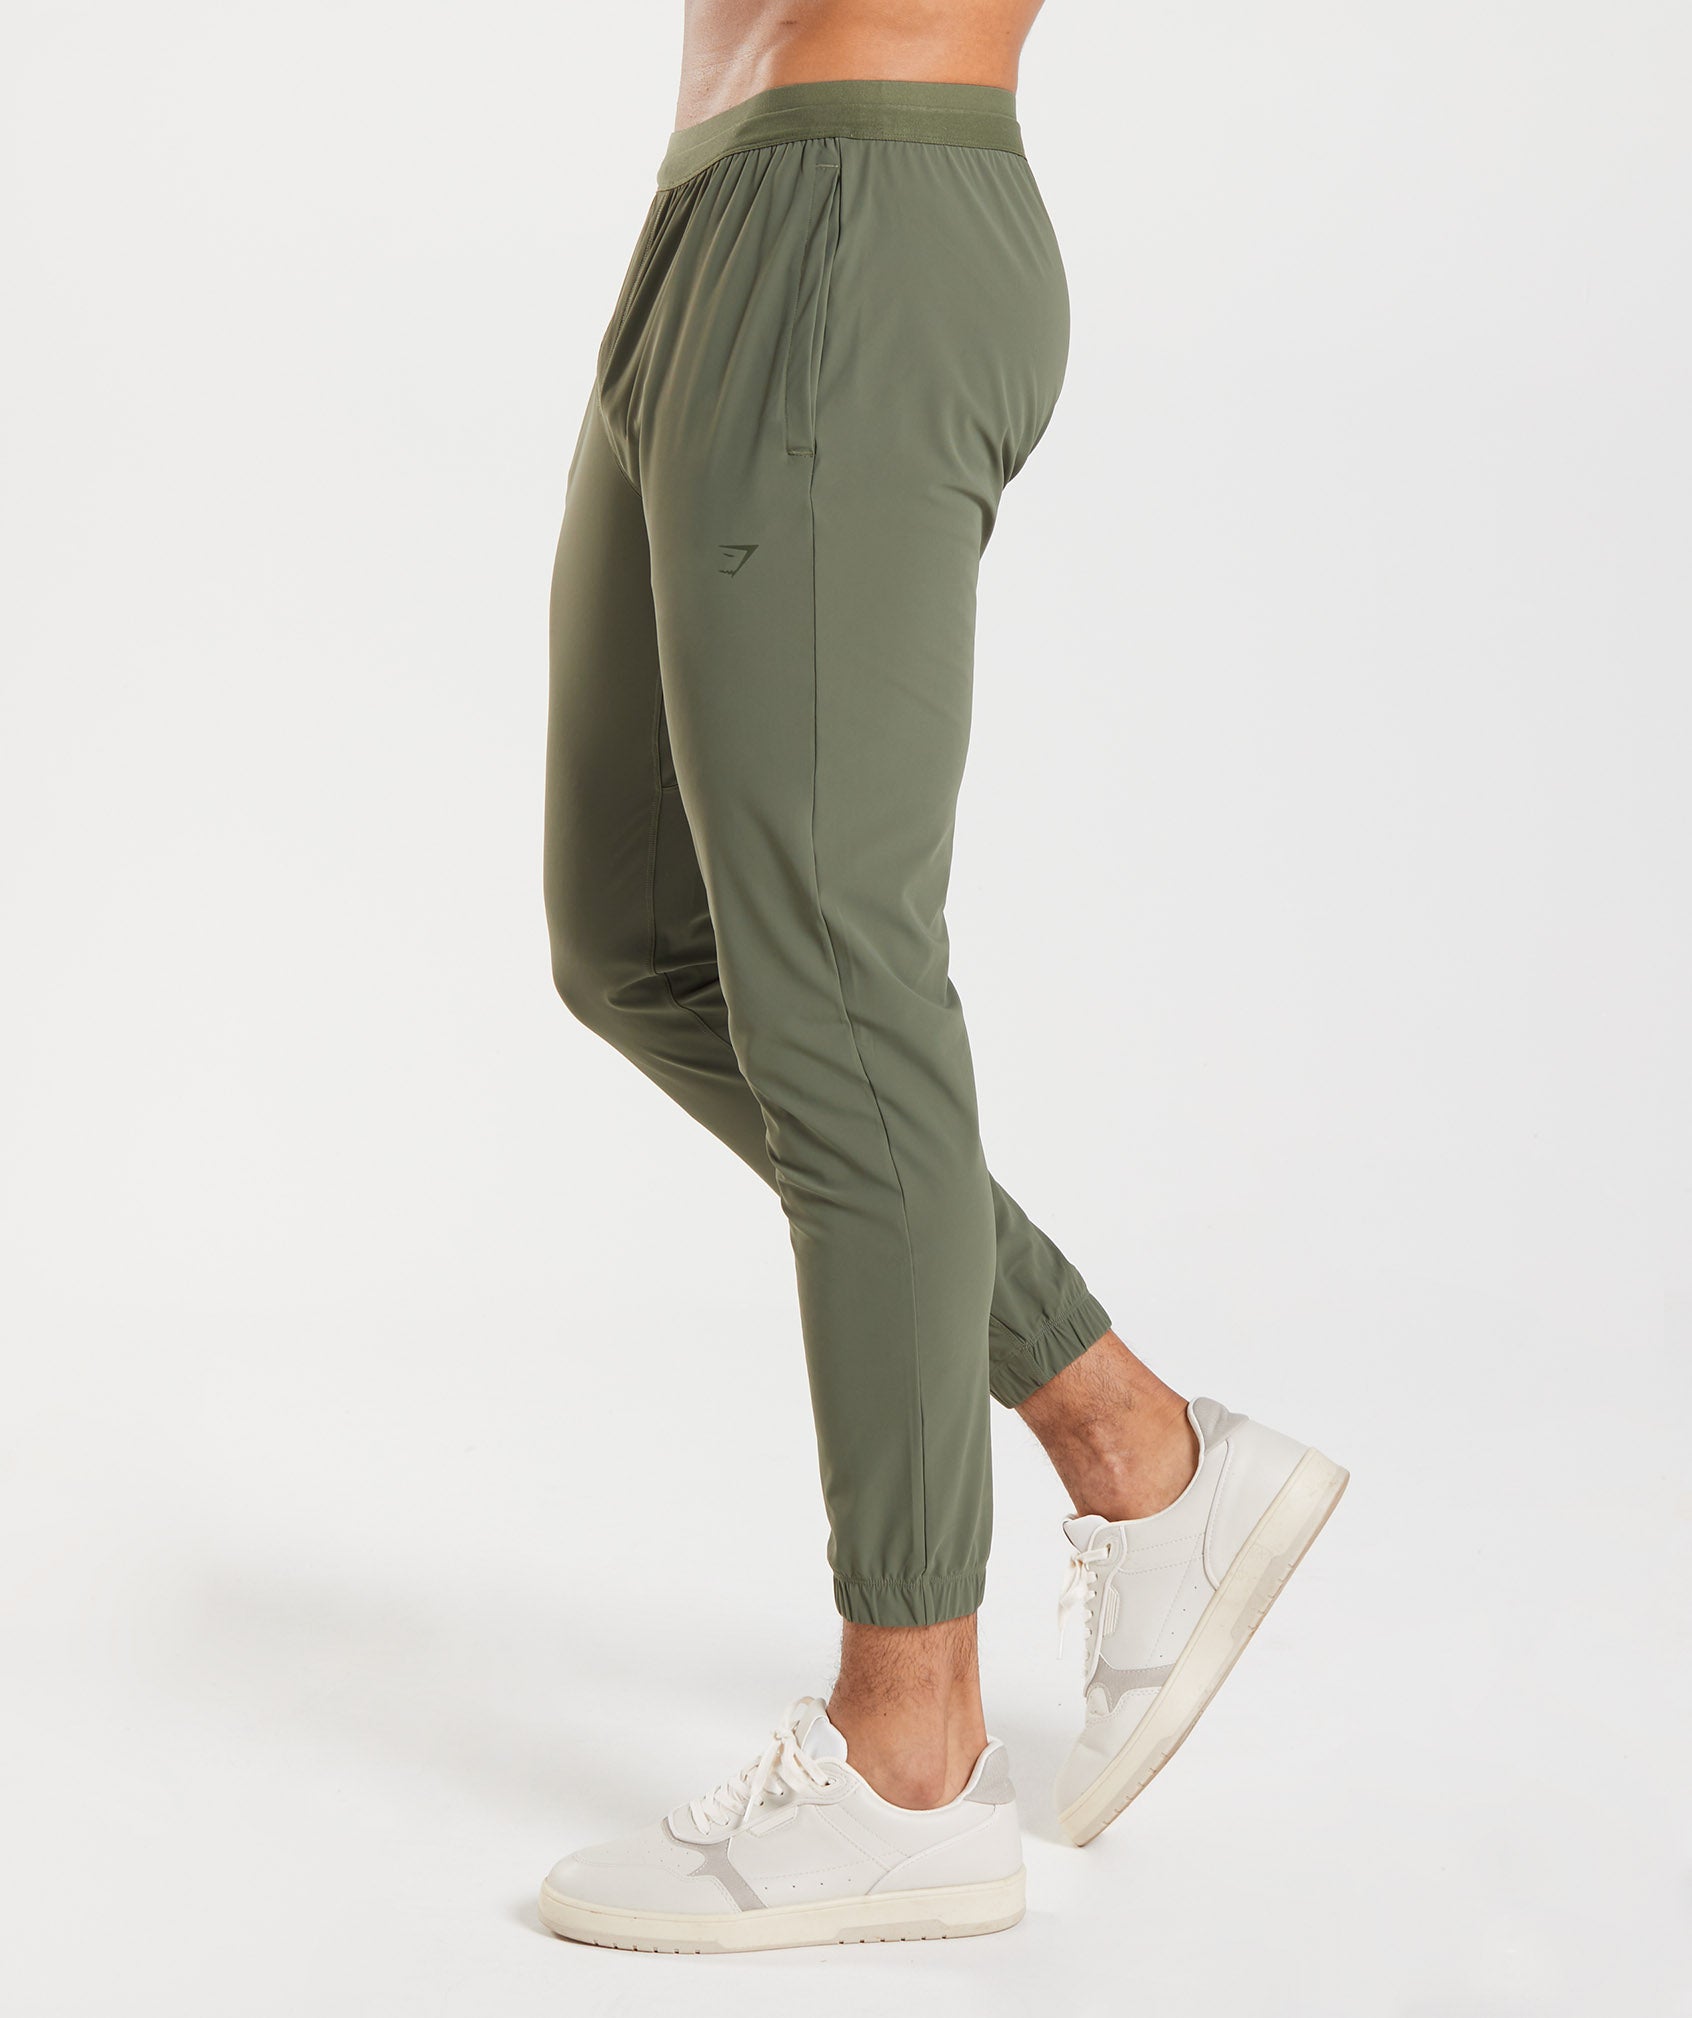 CO, Statement Ribbed Joggers- Olive, Gym Jogger Men